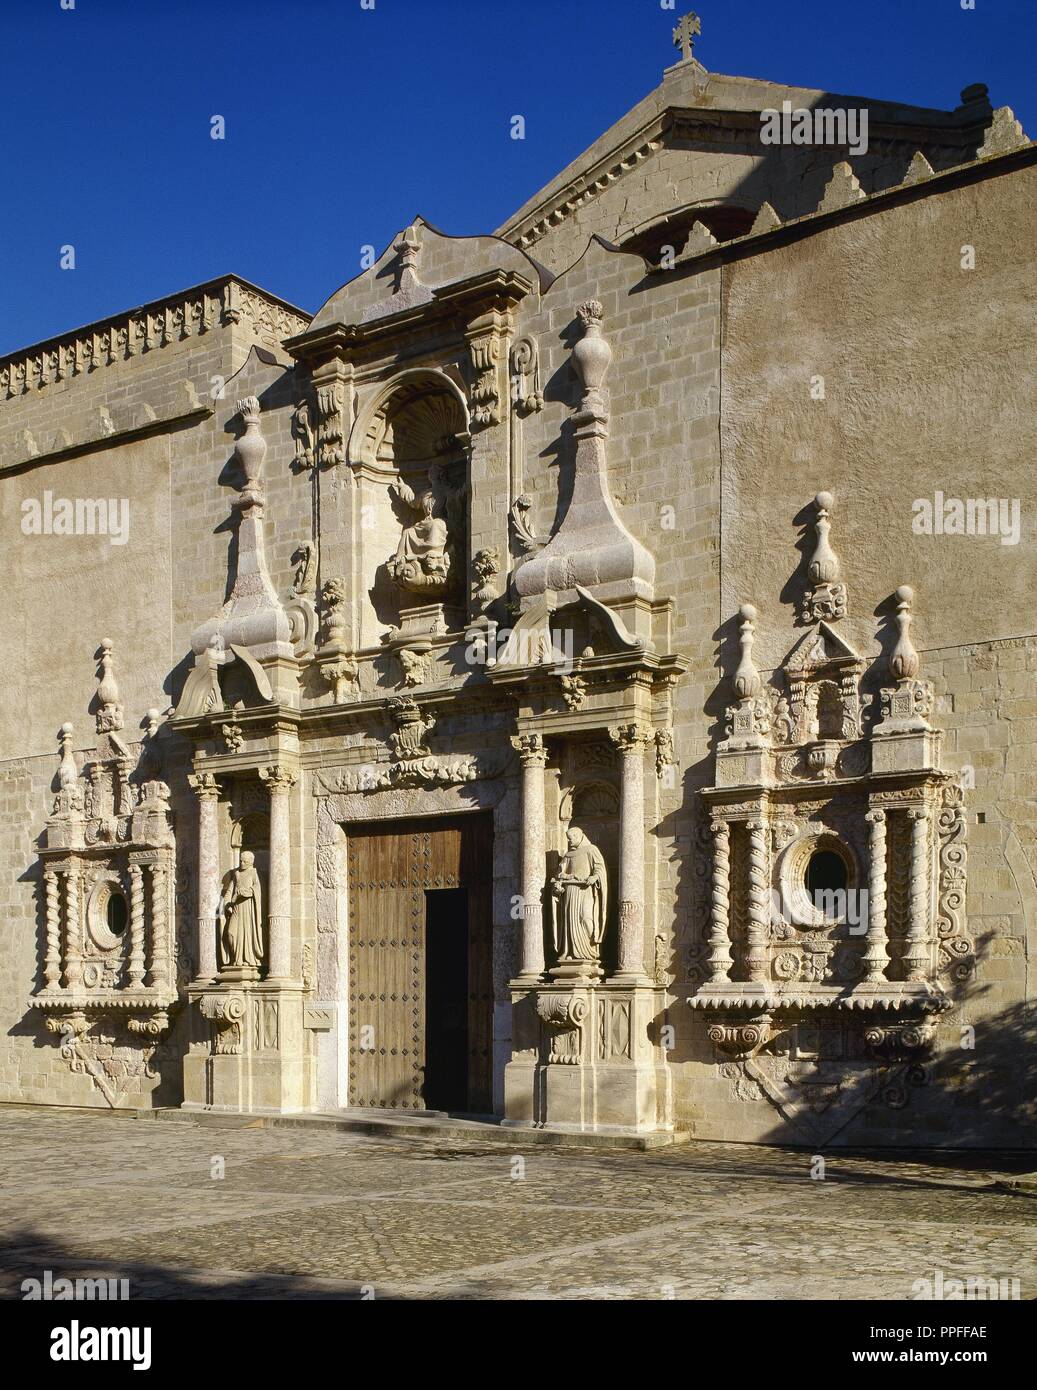 Spain, Catalonia, Tarragona province, Vimbodi. The Royal Abbey of Santa Maria de Poblet, a Cistercian monastery founded in 1150 by order of Count Ramon Berenguer IV. Baroque portal of the church of Saint Mary, 17th century, attributed to Pere Oller. Stock Photo